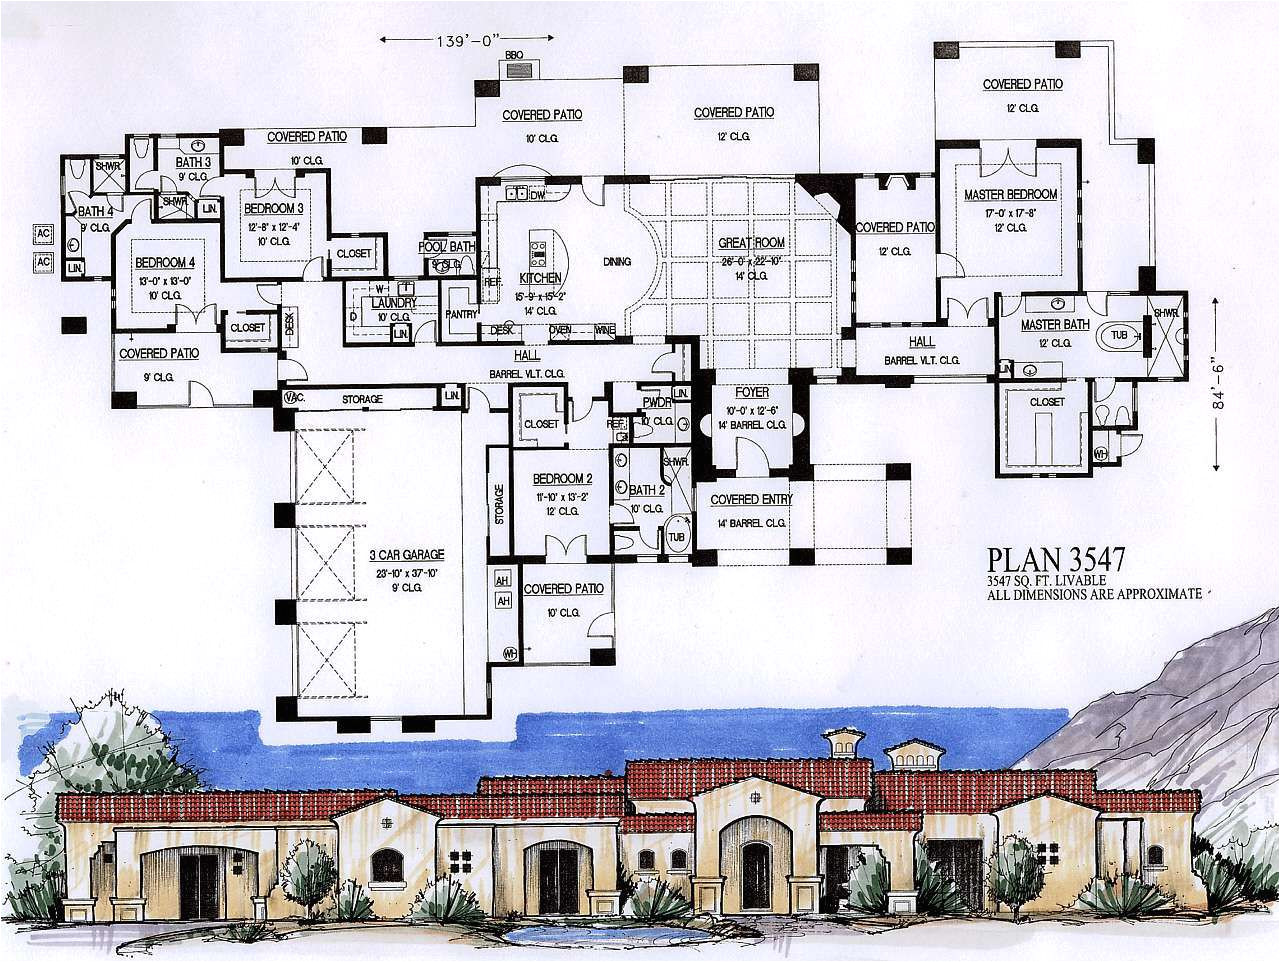 3500 Sq Ft Home Plans 3500 Square Foot House Plans 2018 House Plans and Home